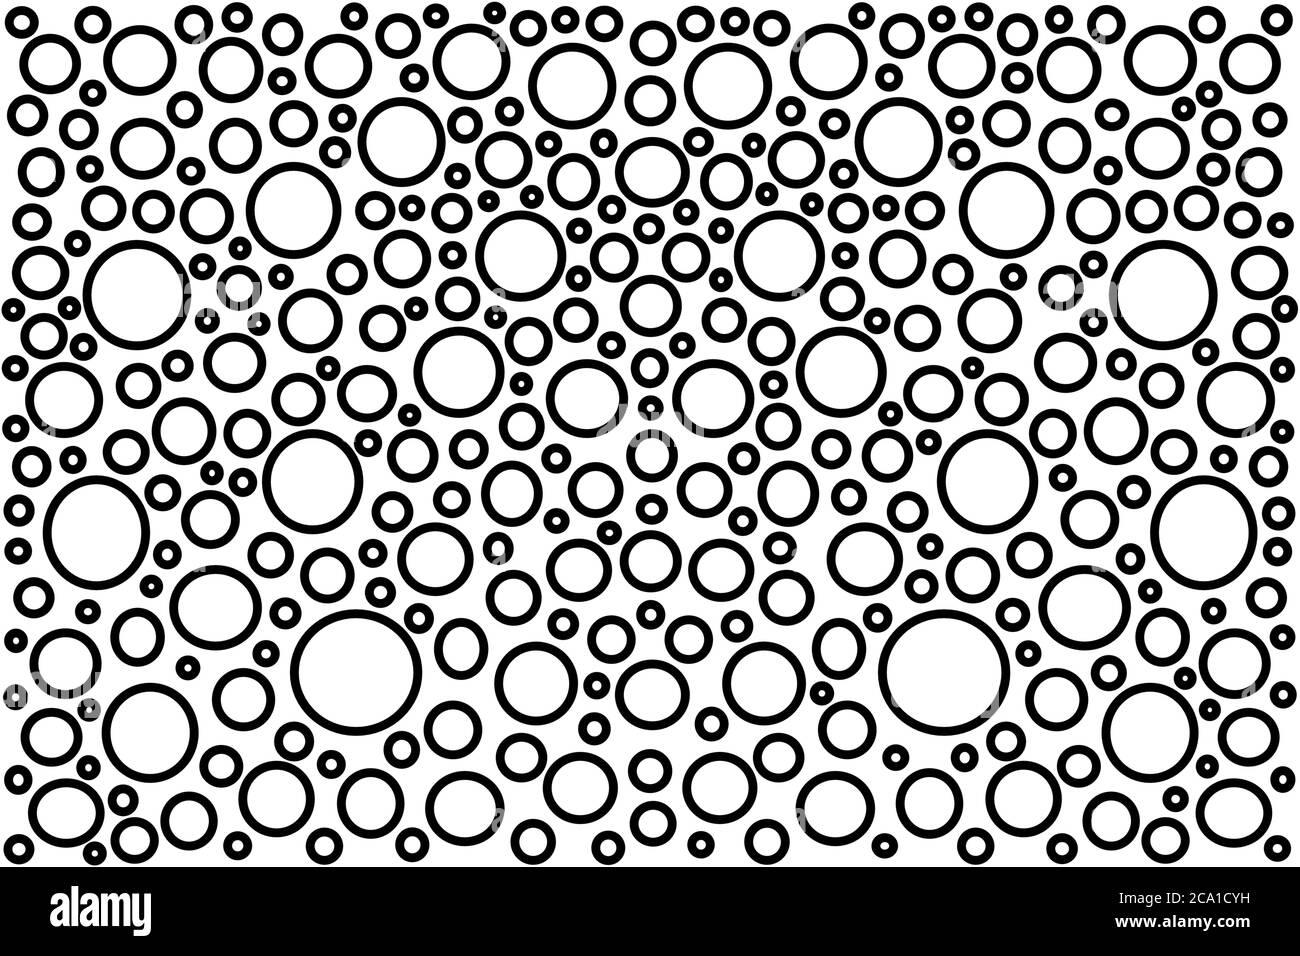 Black white circles on white background for packaging, fabric, wallpaper, textile material and print element, textile printing pattern Stock Photo